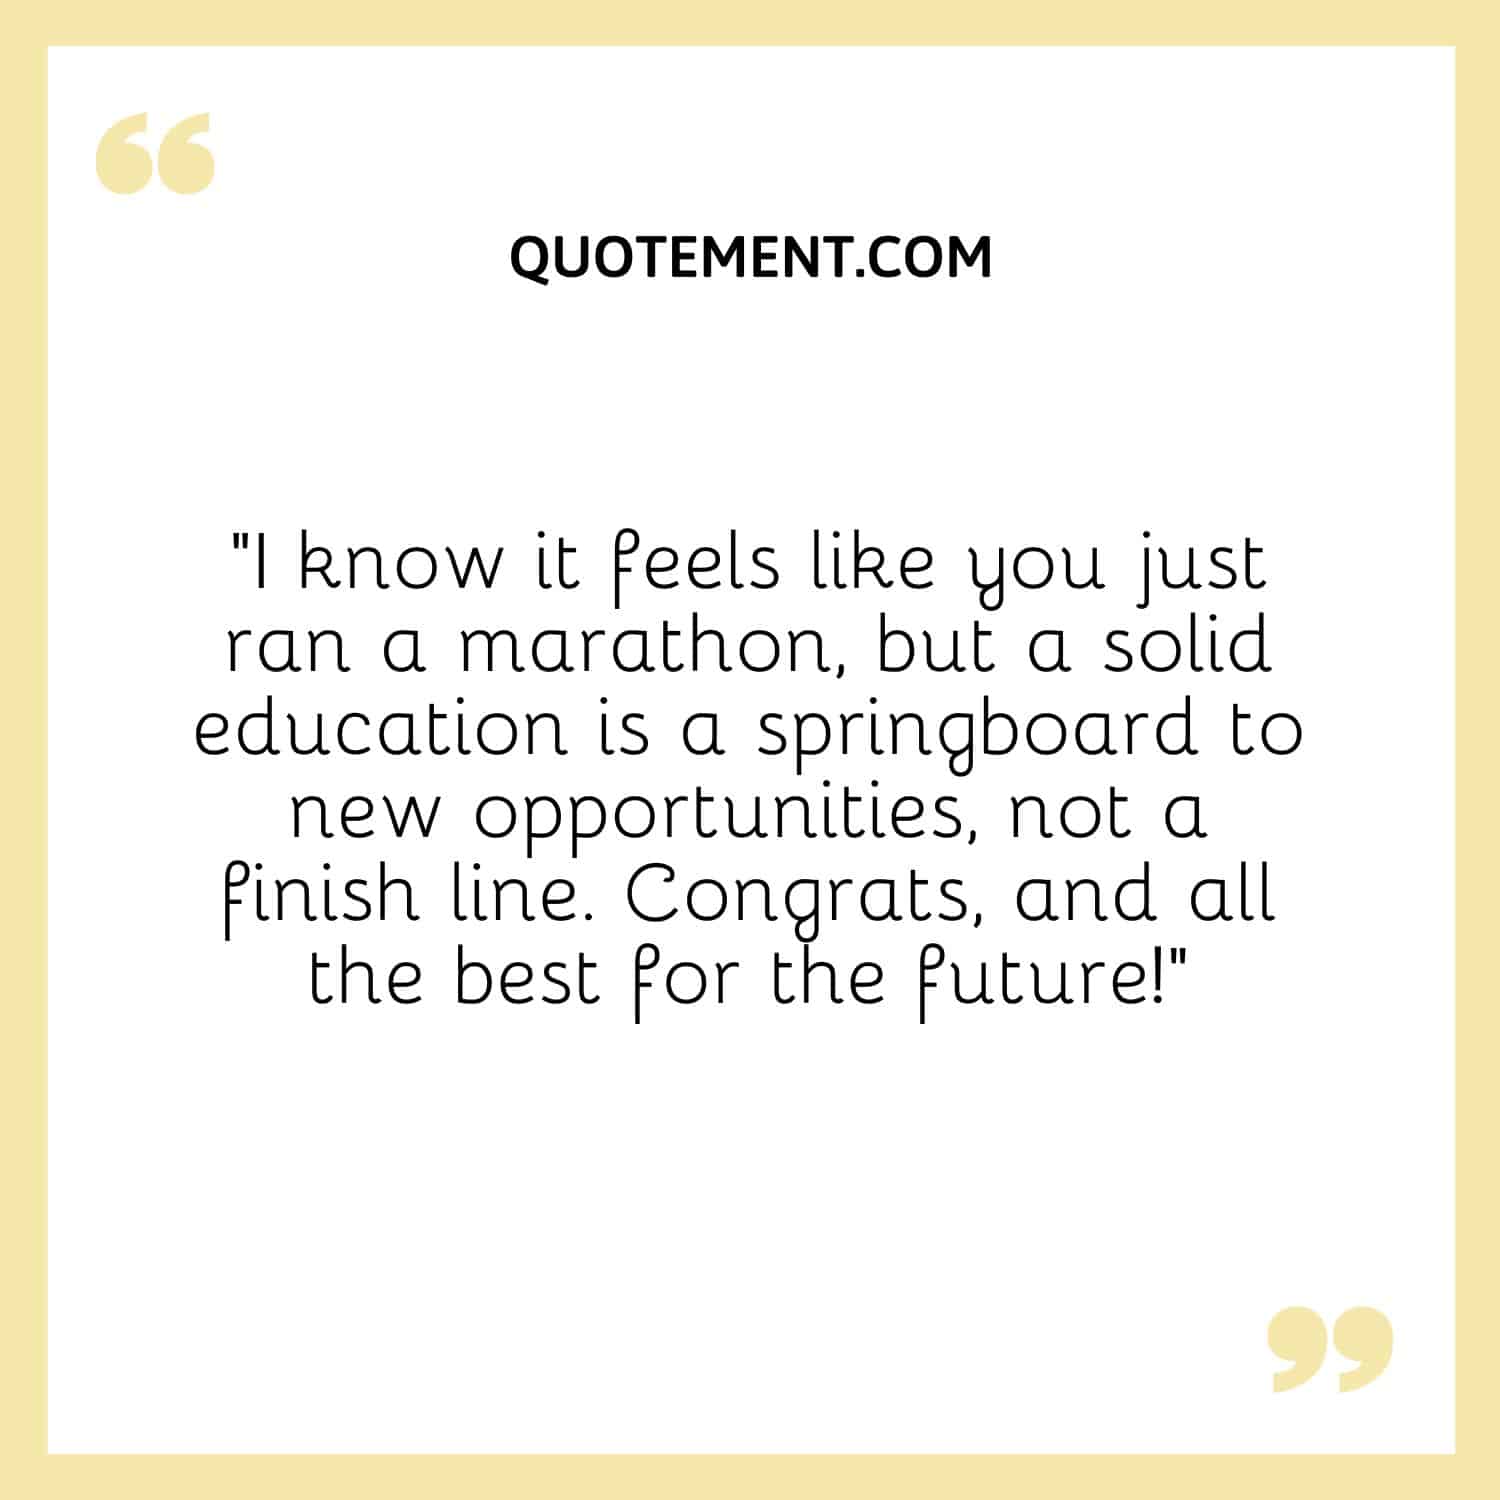 “I know it feels like you just ran a marathon, but a solid education is a springboard to new opportunities, not a finish line. Congrats, and all the best for the future!”